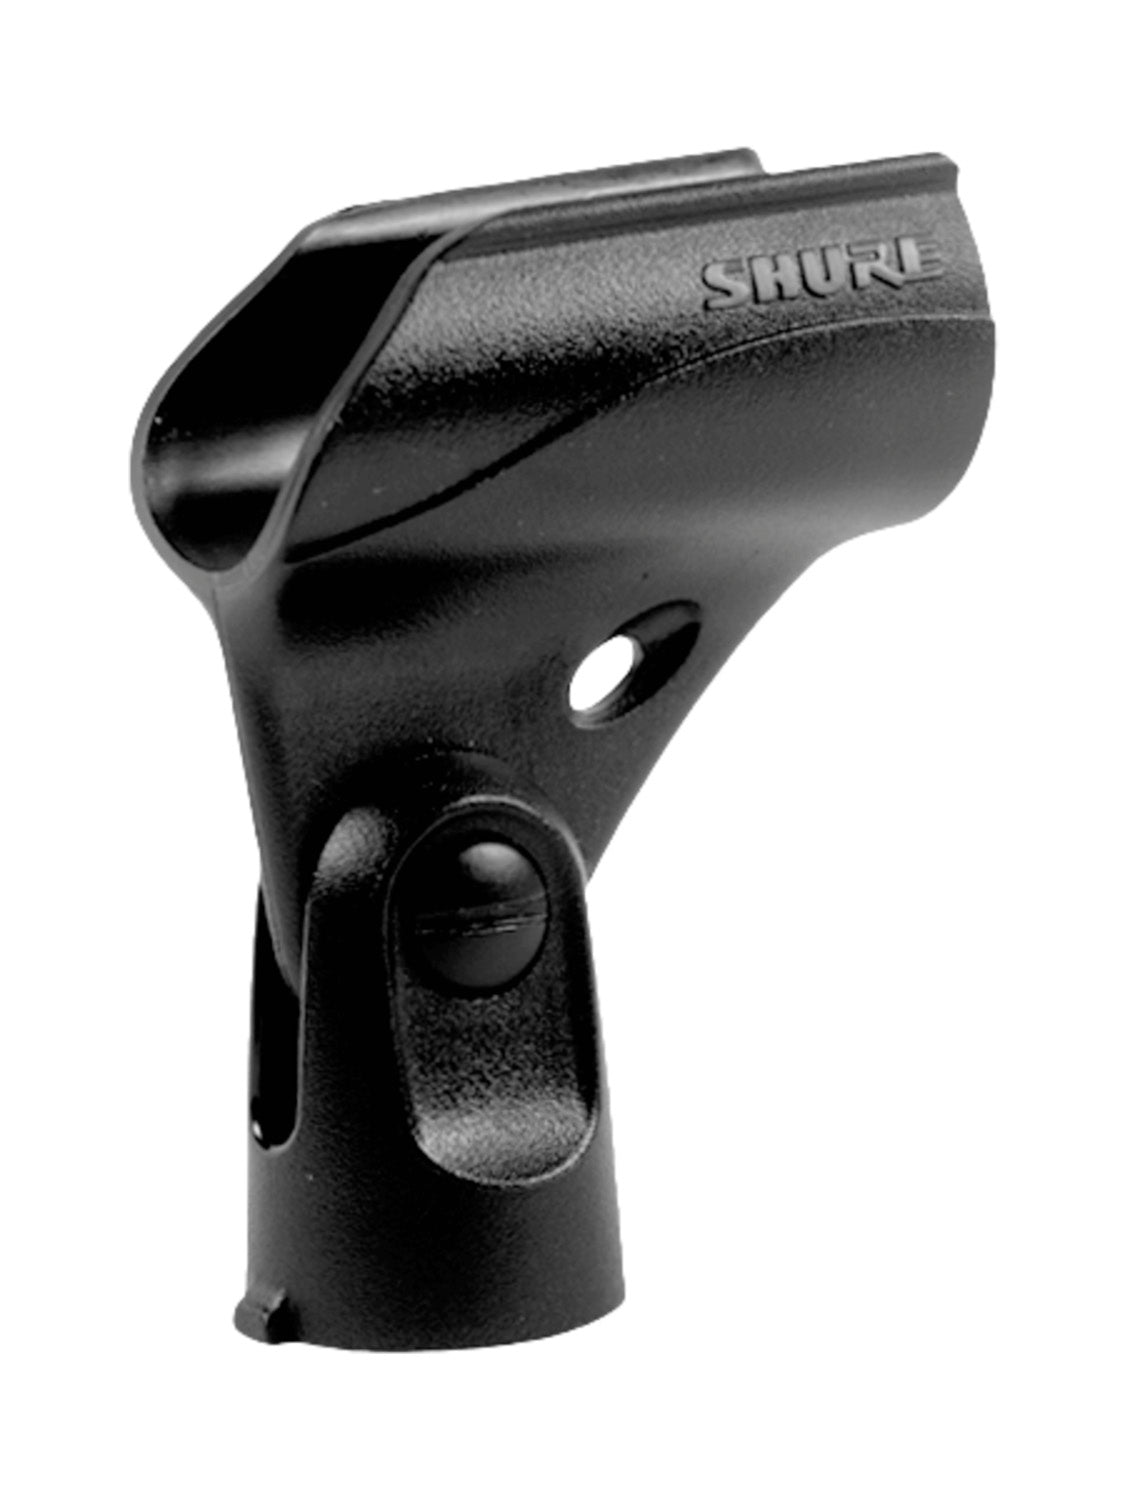 Shure A25D, Mic Clip Break Resistant Common Stand Adapter for Shure Handheld Mics - Hollywood DJ